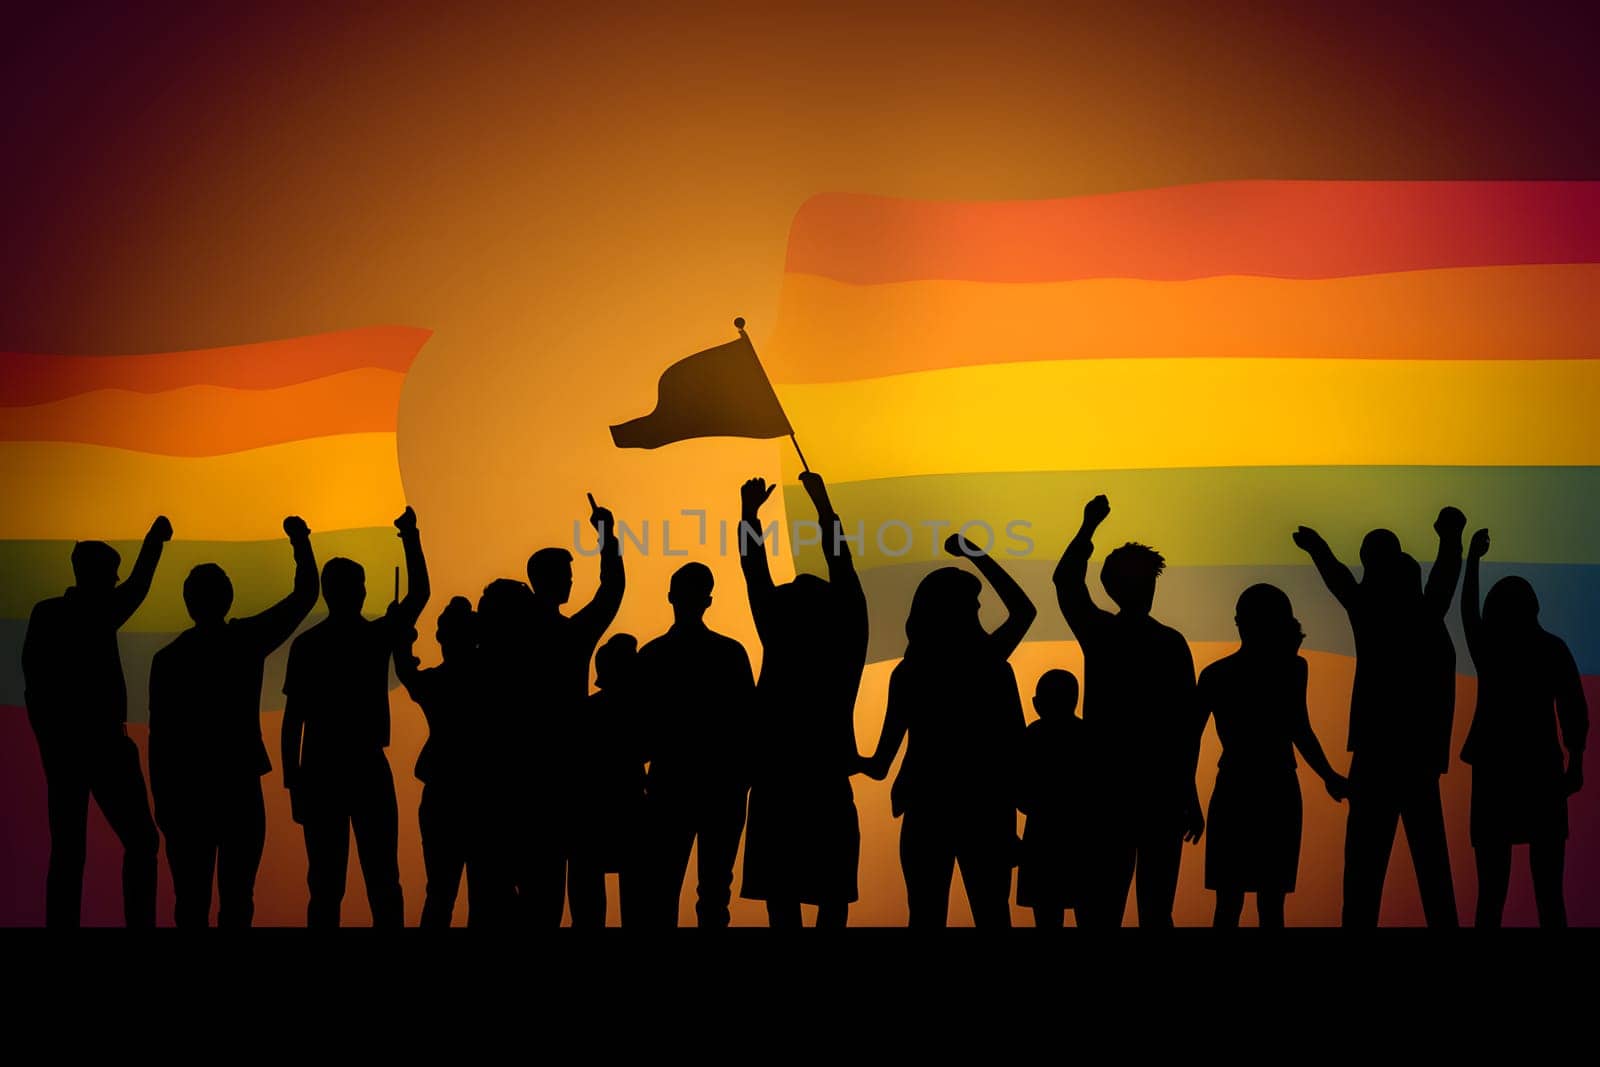 silhouettes of people group raising LGBT flag with their hand in the air. Neural network generated in May 2023. Not based on any actual person, scene or pattern.